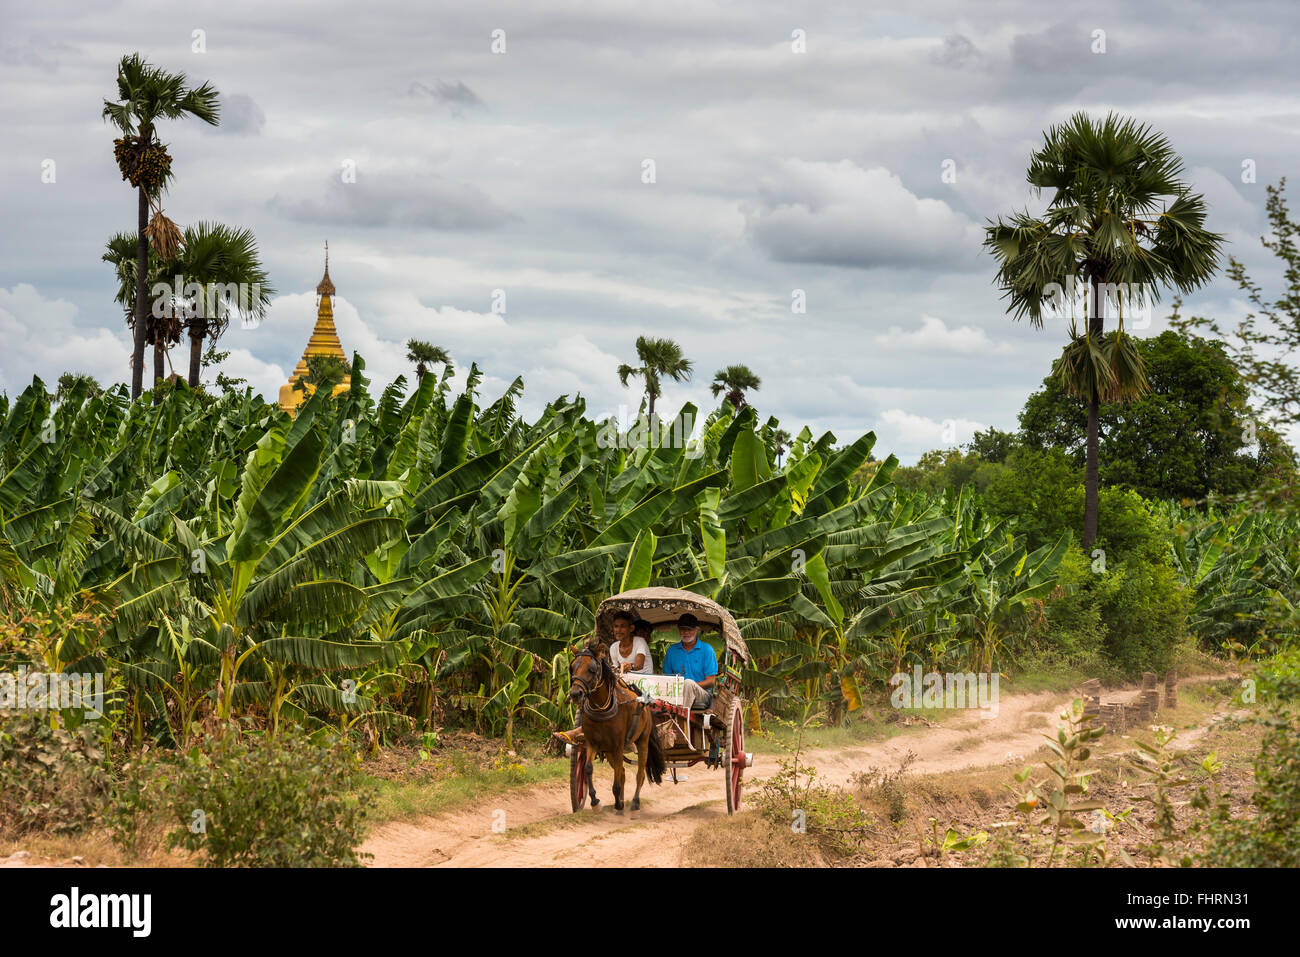 Horse-drawn carriage with tourists on a road in front of banana trees, behind ancient city Inwa or Ava, Mandalay Division Stock Photo